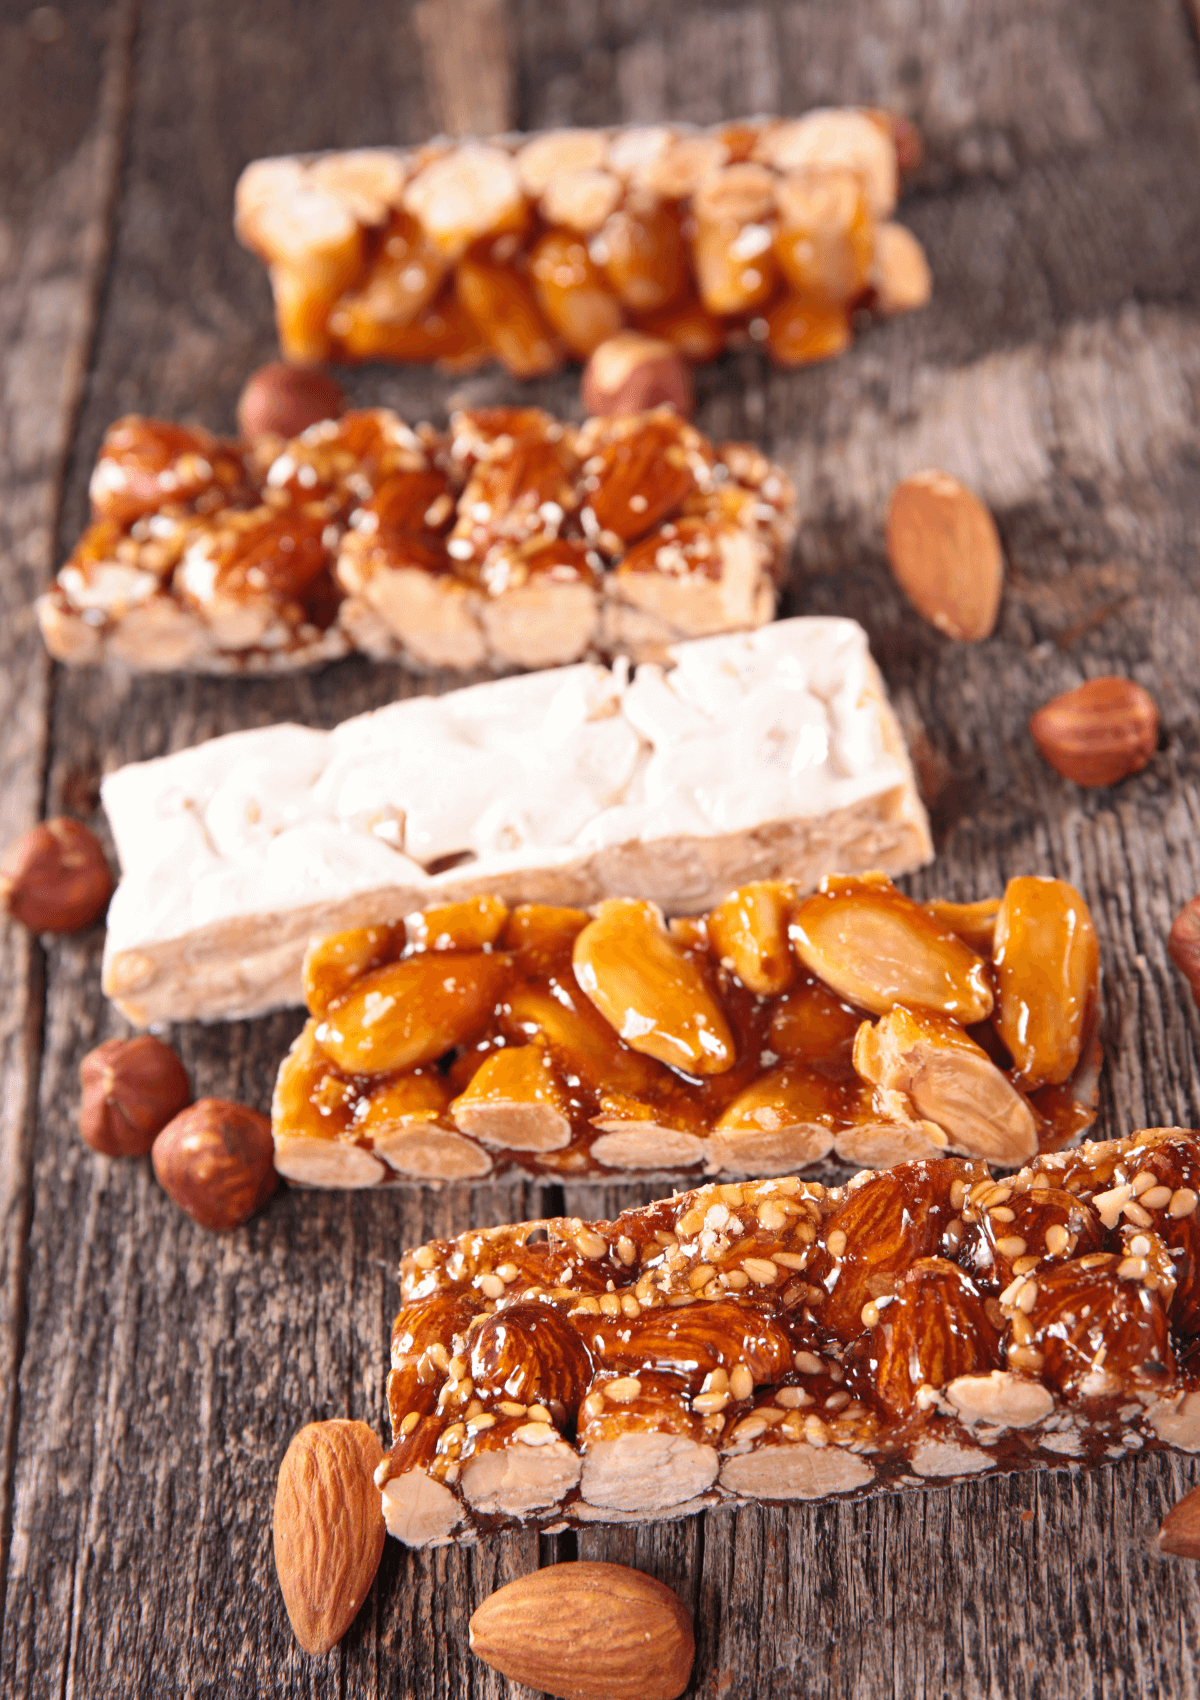 turron is a local food to Barcelona and Catalunya, made with almonds and honey. 